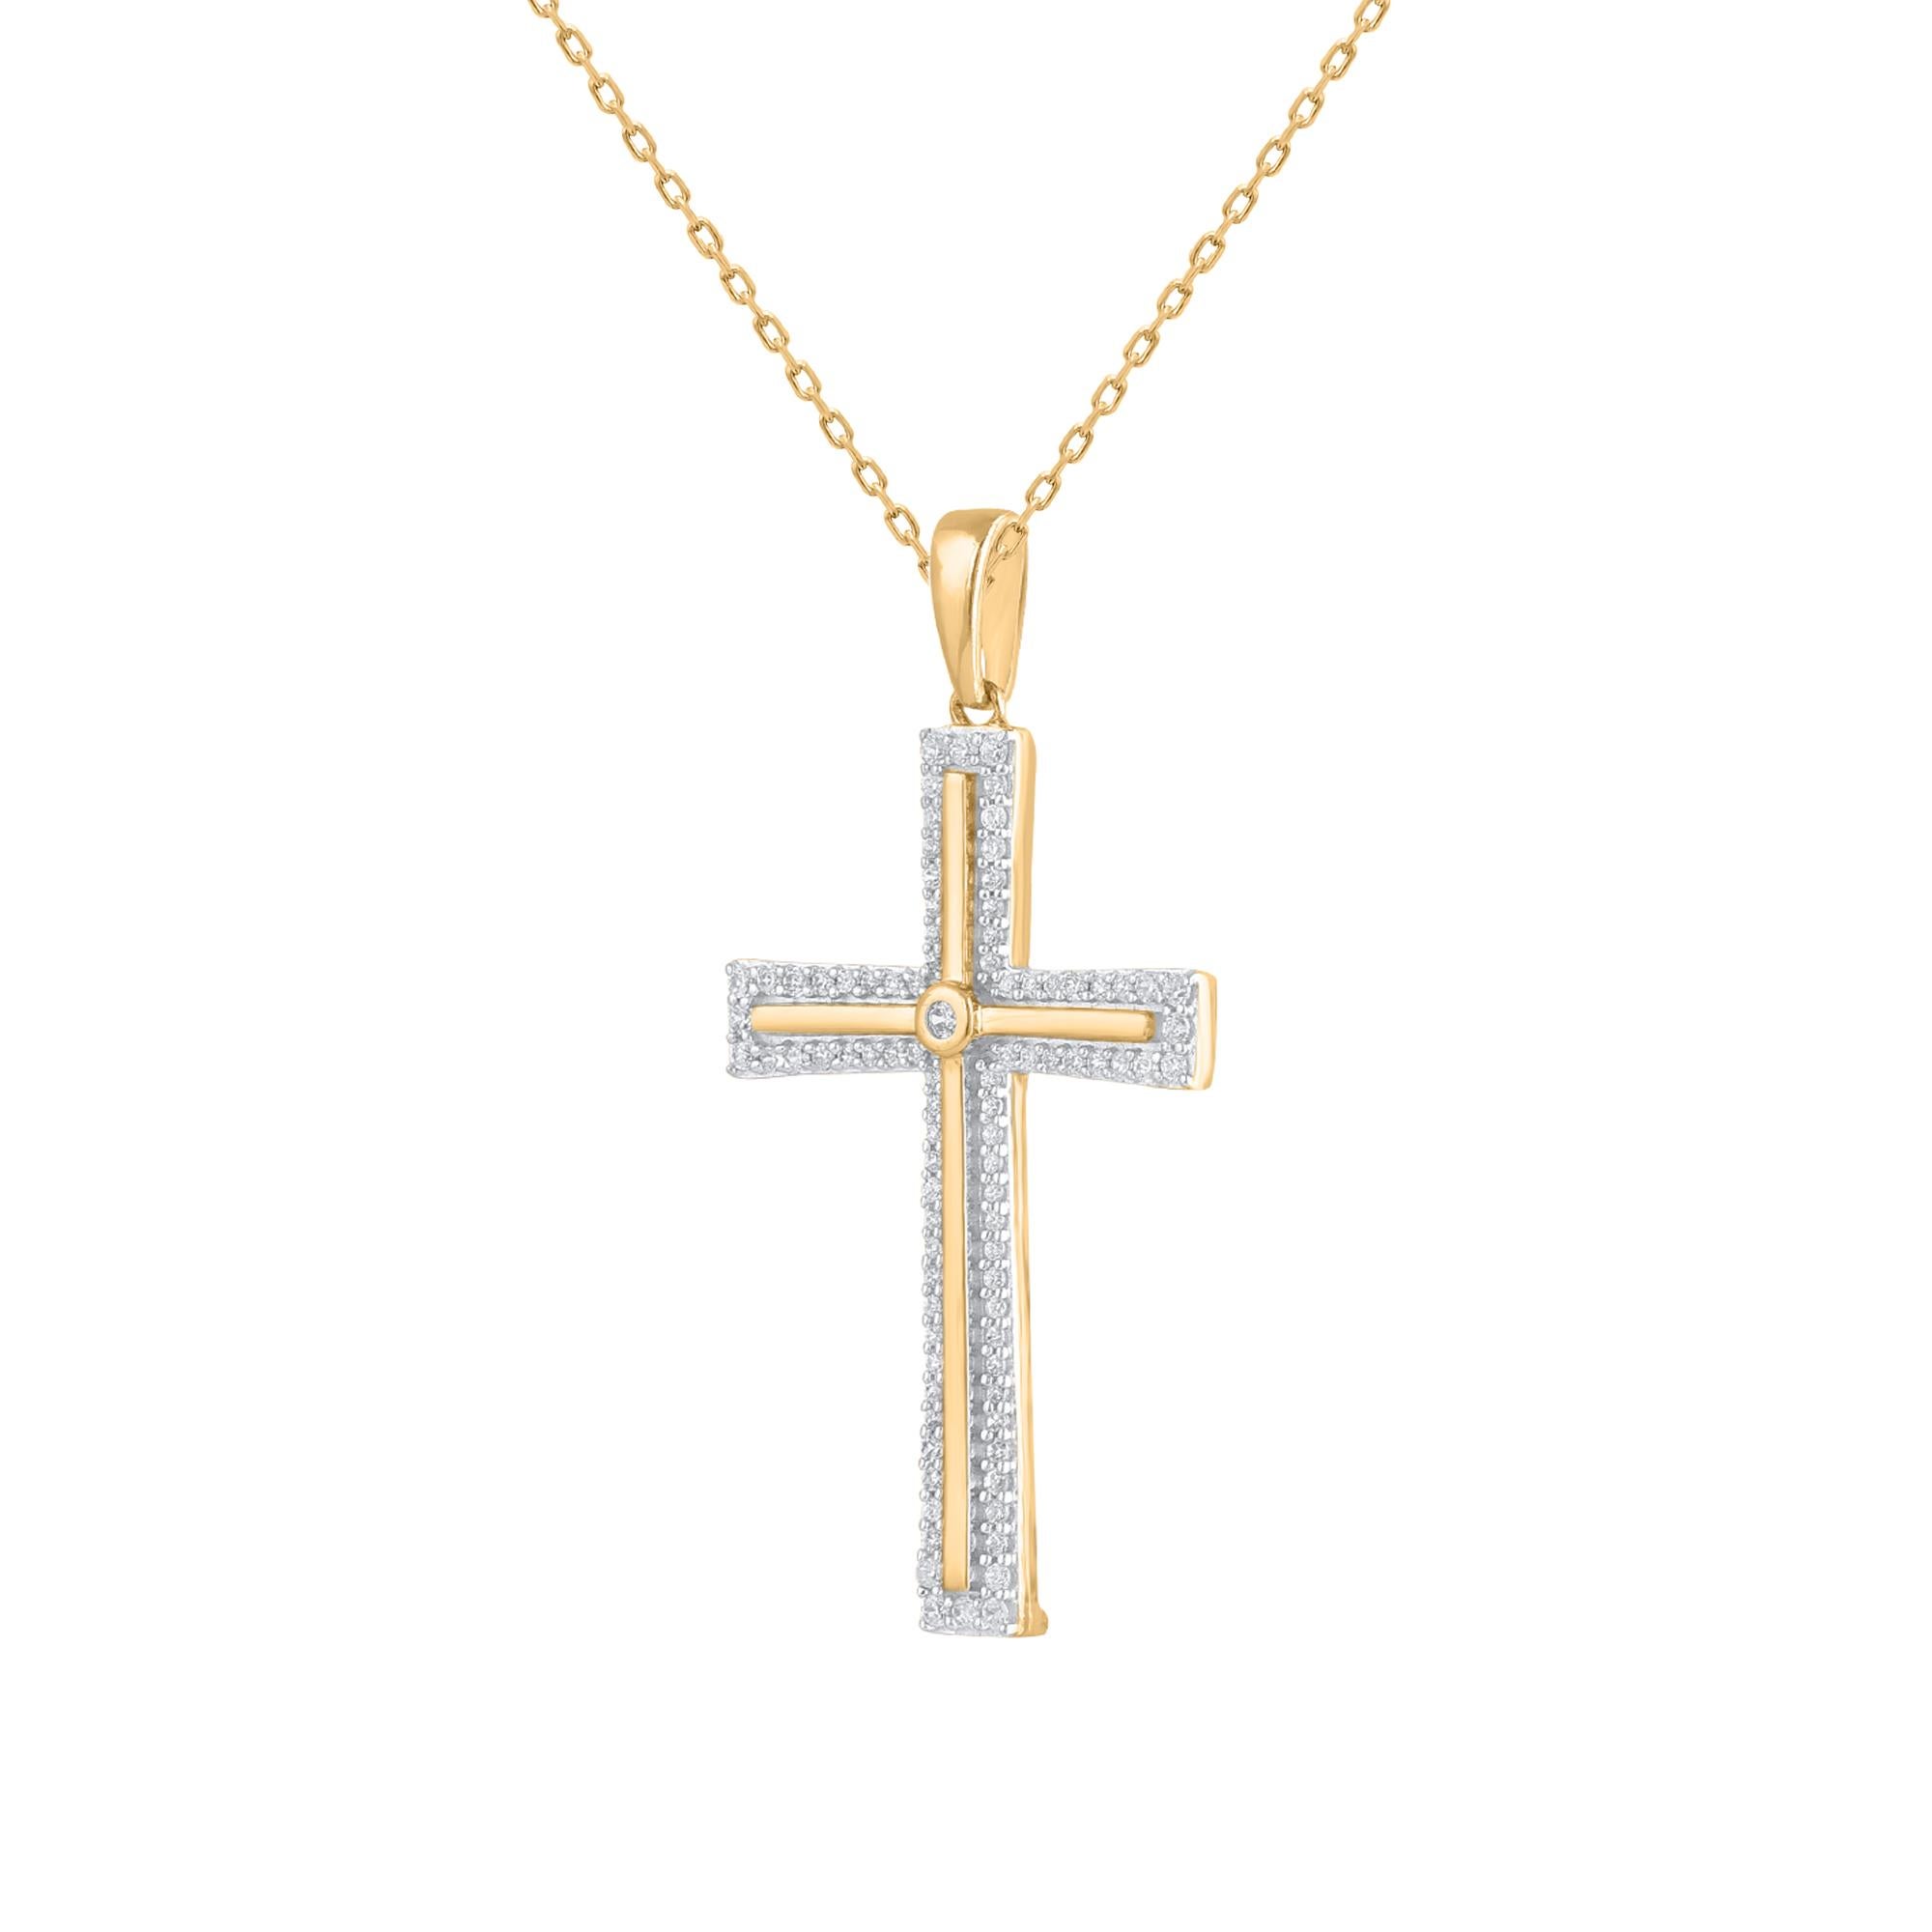 Let your faith shine with this simple and elegant cross pendant. Beautifully crafted by our inhouse experts in 18 karat yellow gold and embellished with 91 single cut and brilliant cut diamond set in prong & bezel setting. The total diamond weight